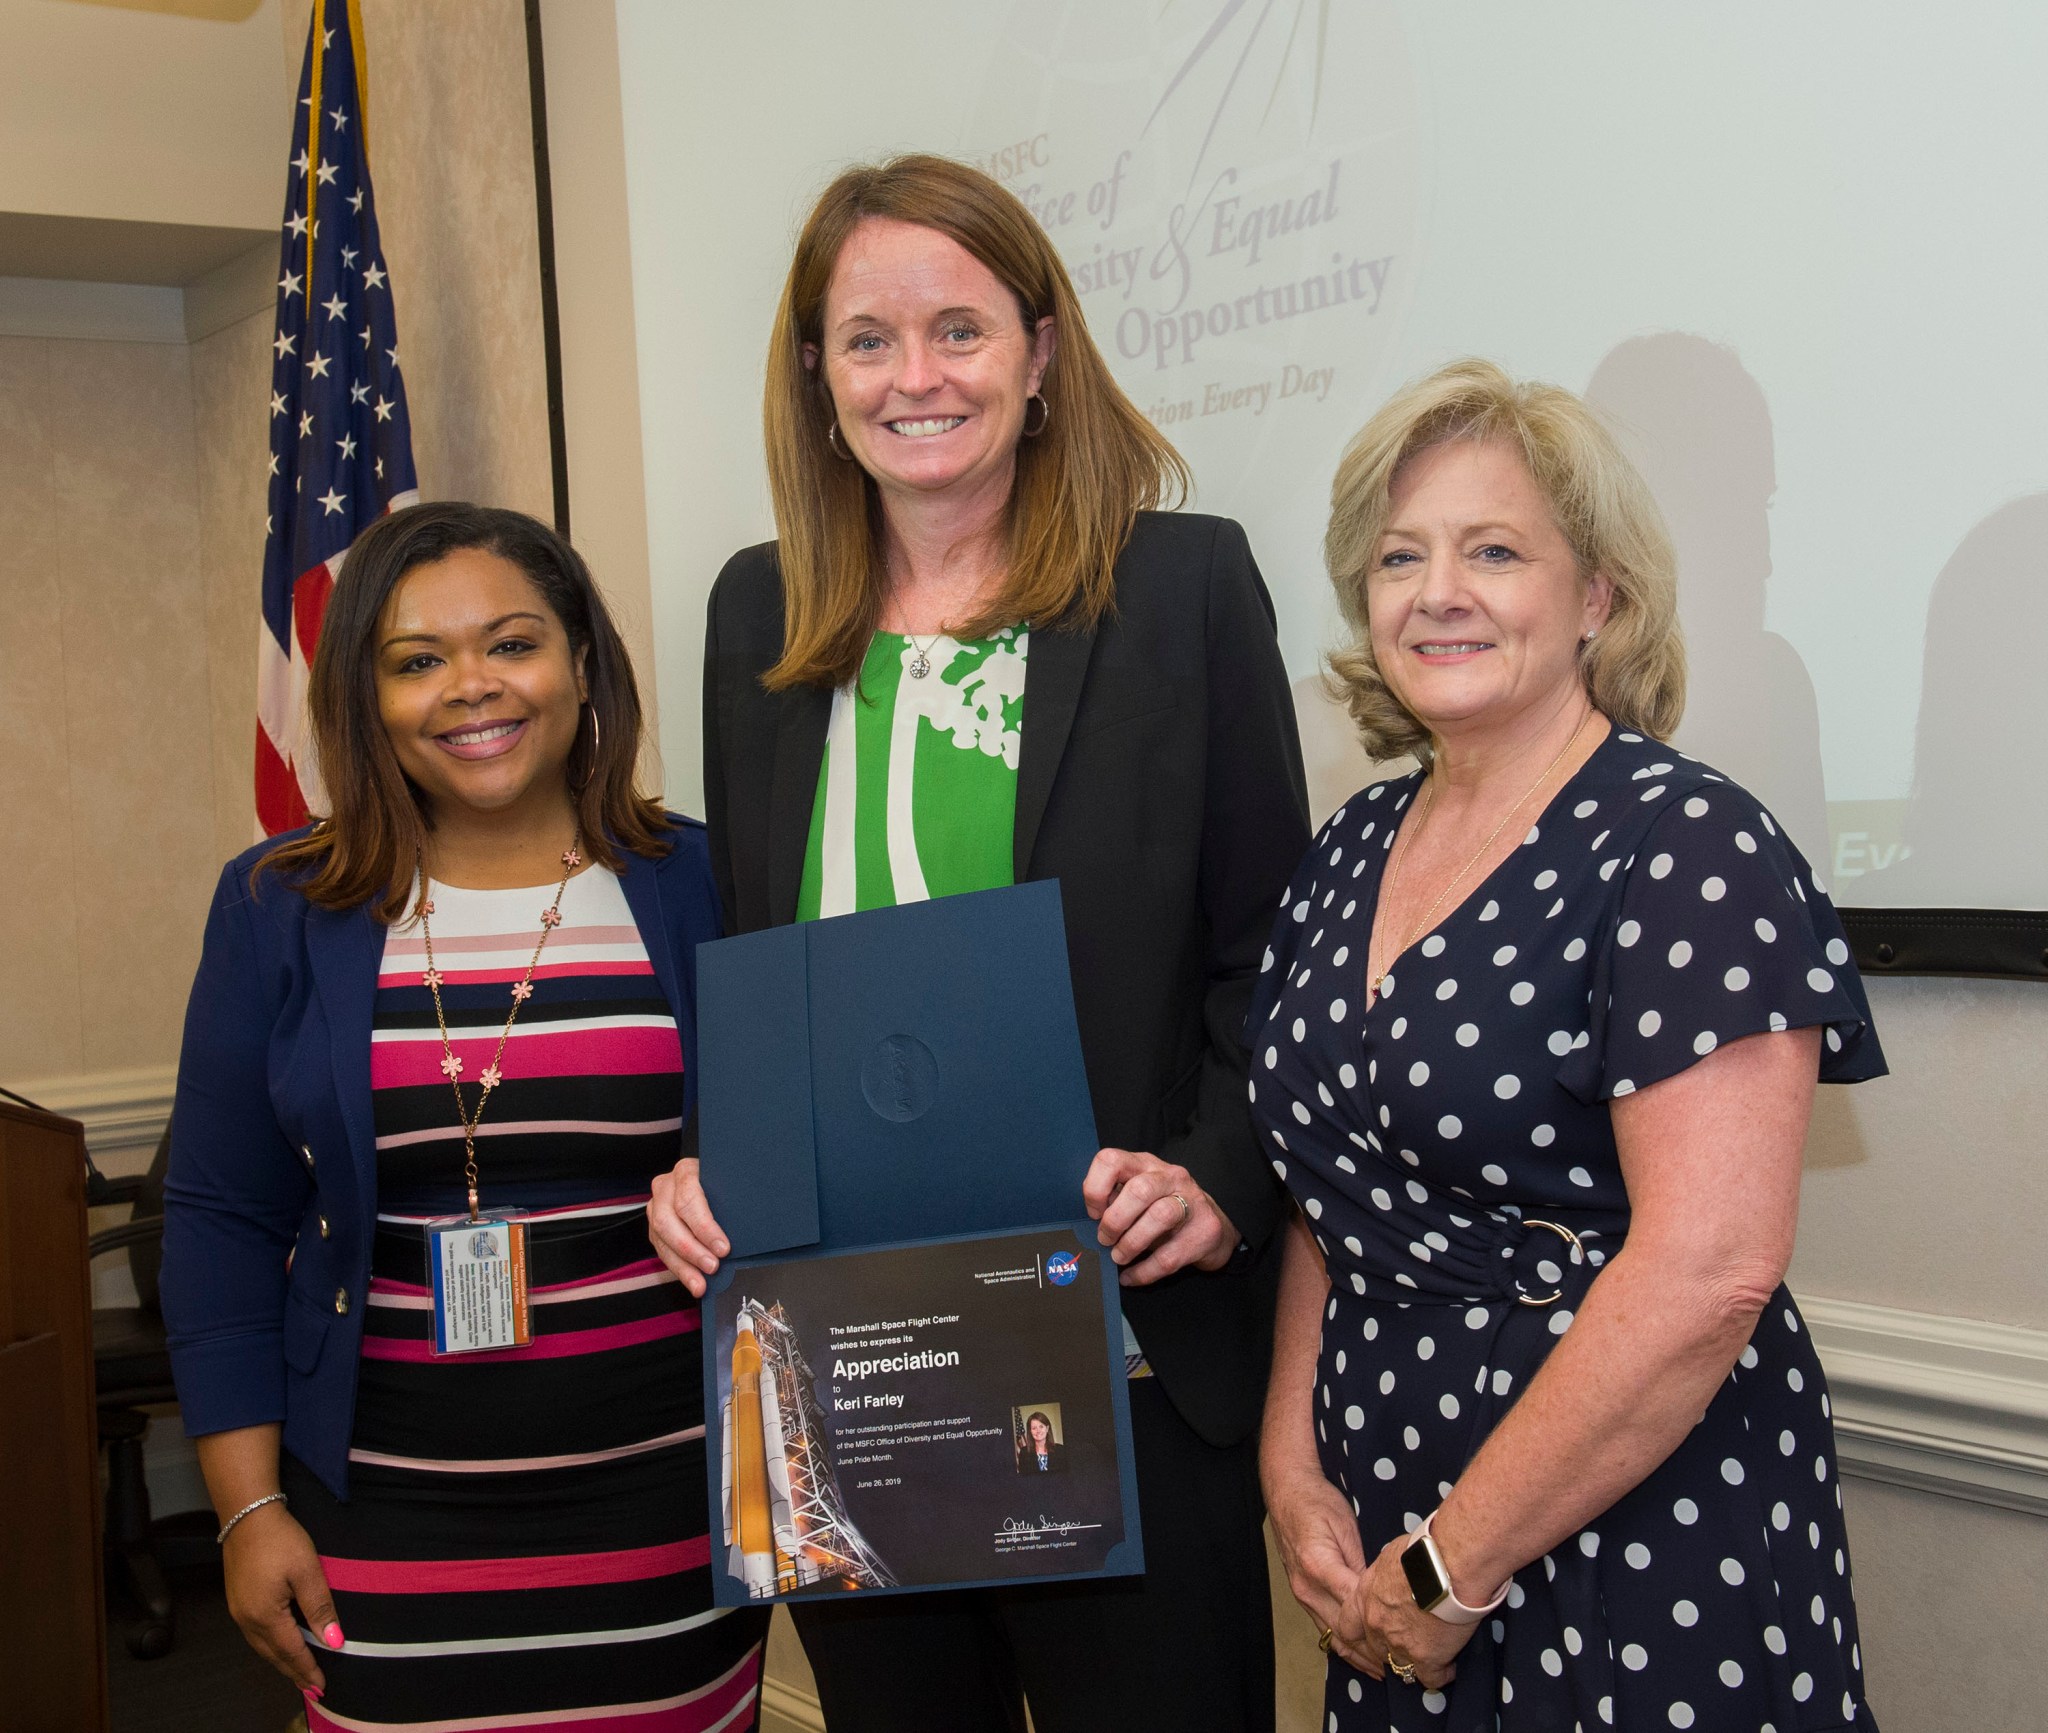 FBI Section Chief Keri Farley, center, receives a NASA certificate of appreciation from Jody Singer, right, and Denise Smithers.